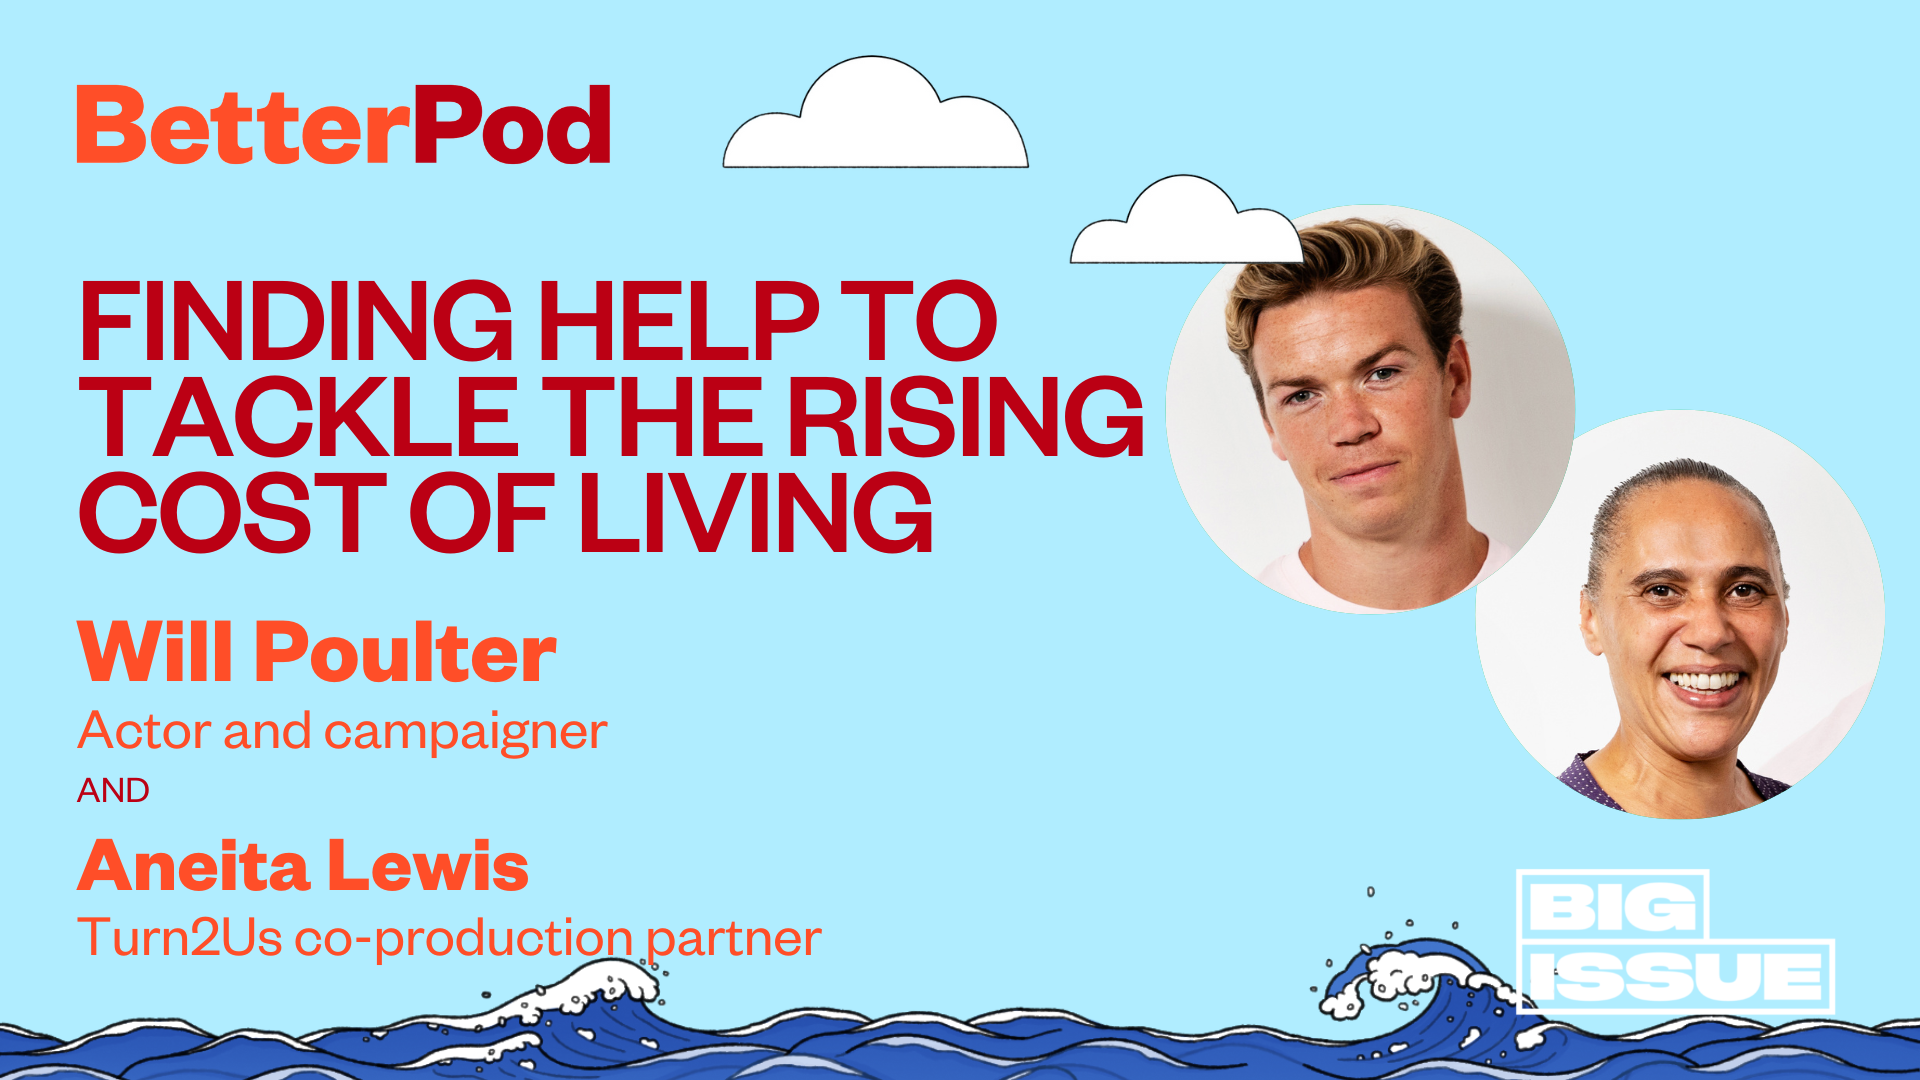 Will Poulter and Aneita Lewis on BetterPod